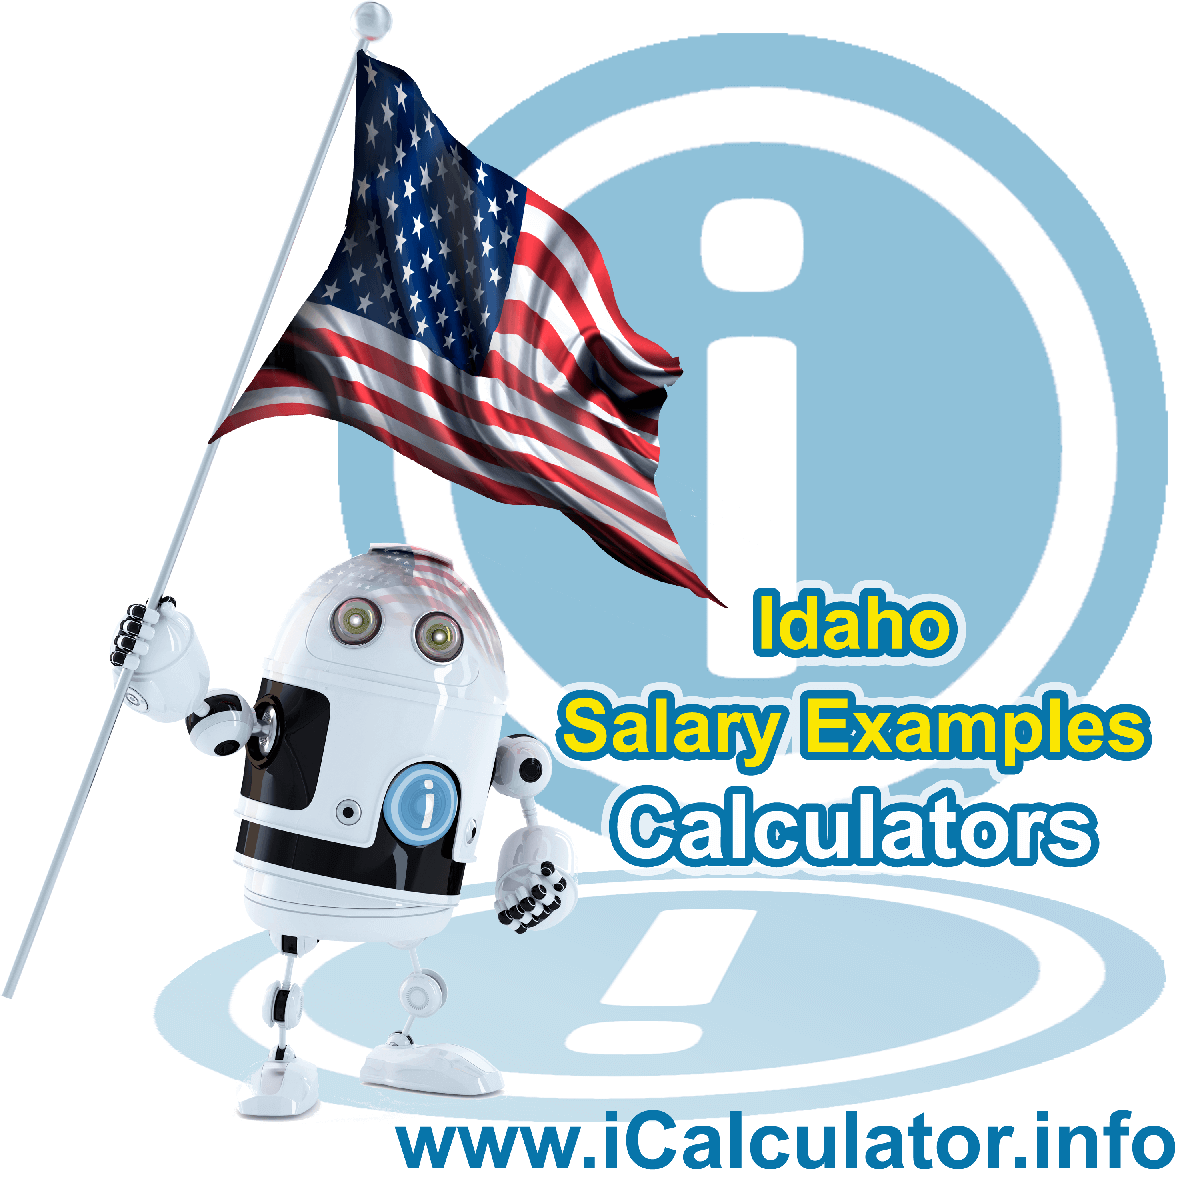 Idaho Salary Example for $210,000.00 in 2022 | iCalculator™ | $210,000.00 salary example for employee and employer paying Idaho State tincome taxes. Detailed salary after tax calculation including Idaho State Tax, Federal State Tax, Medicare Deductions, Social Security, Capital Gains and other income tax and salary deductions complete with supporting Idaho state tax tables 